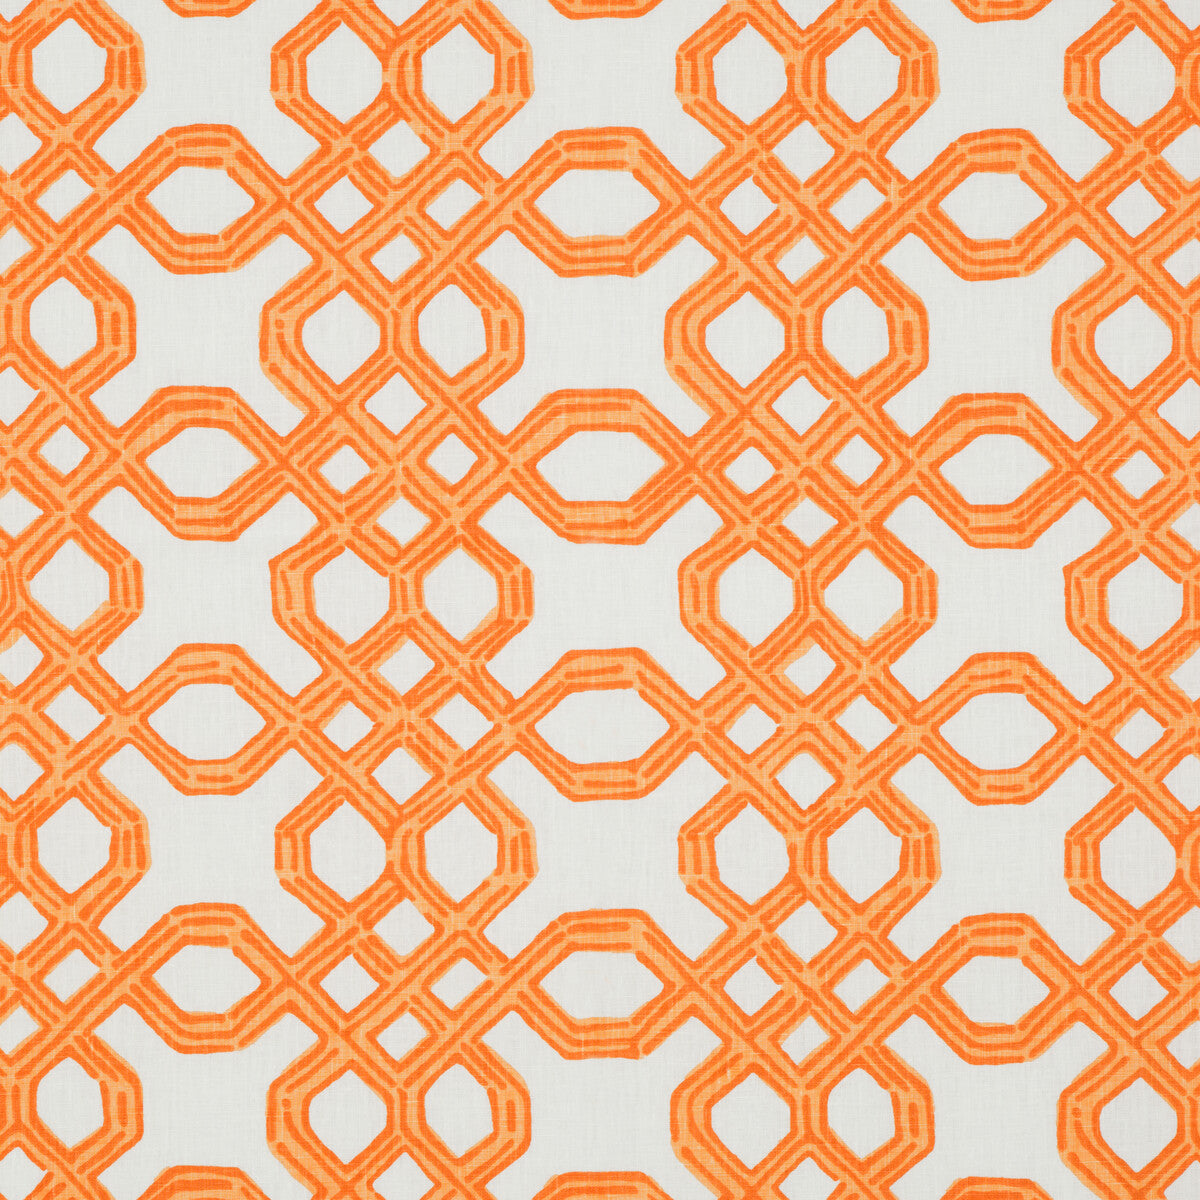 Well Connected fabric in clementine color - pattern 2011101.12.0 - by Lee Jofa in the Lilly Pulitzer II collection